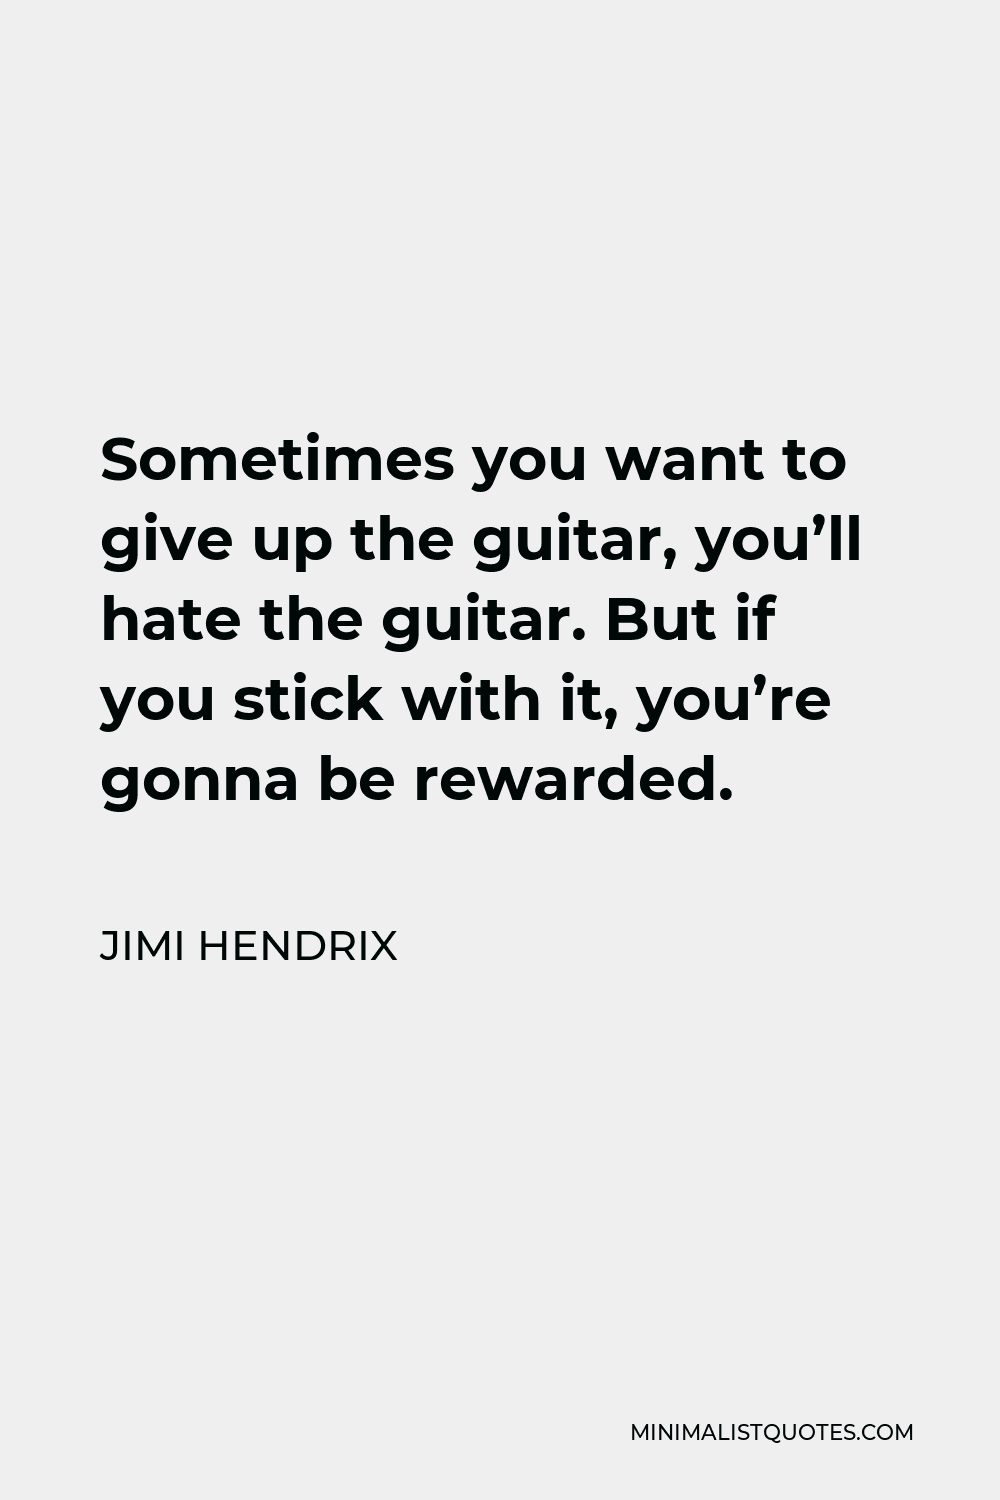 Jimi Hendrix Quote - Sometimes you want to give up the guitar, you’ll hate the guitar. But if you stick with it, you’re gonna be rewarded.